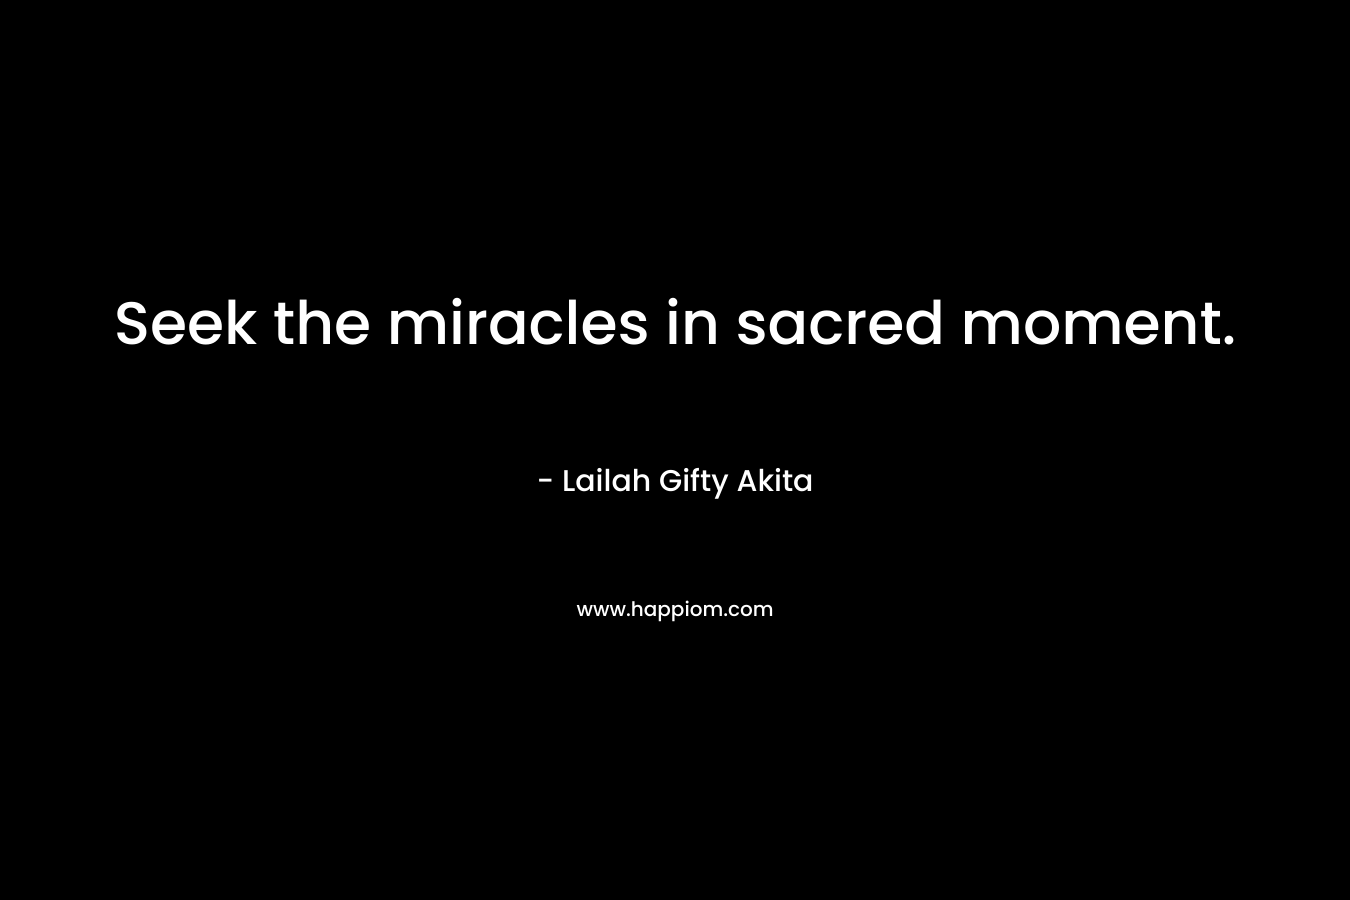 Seek the miracles in sacred moment.